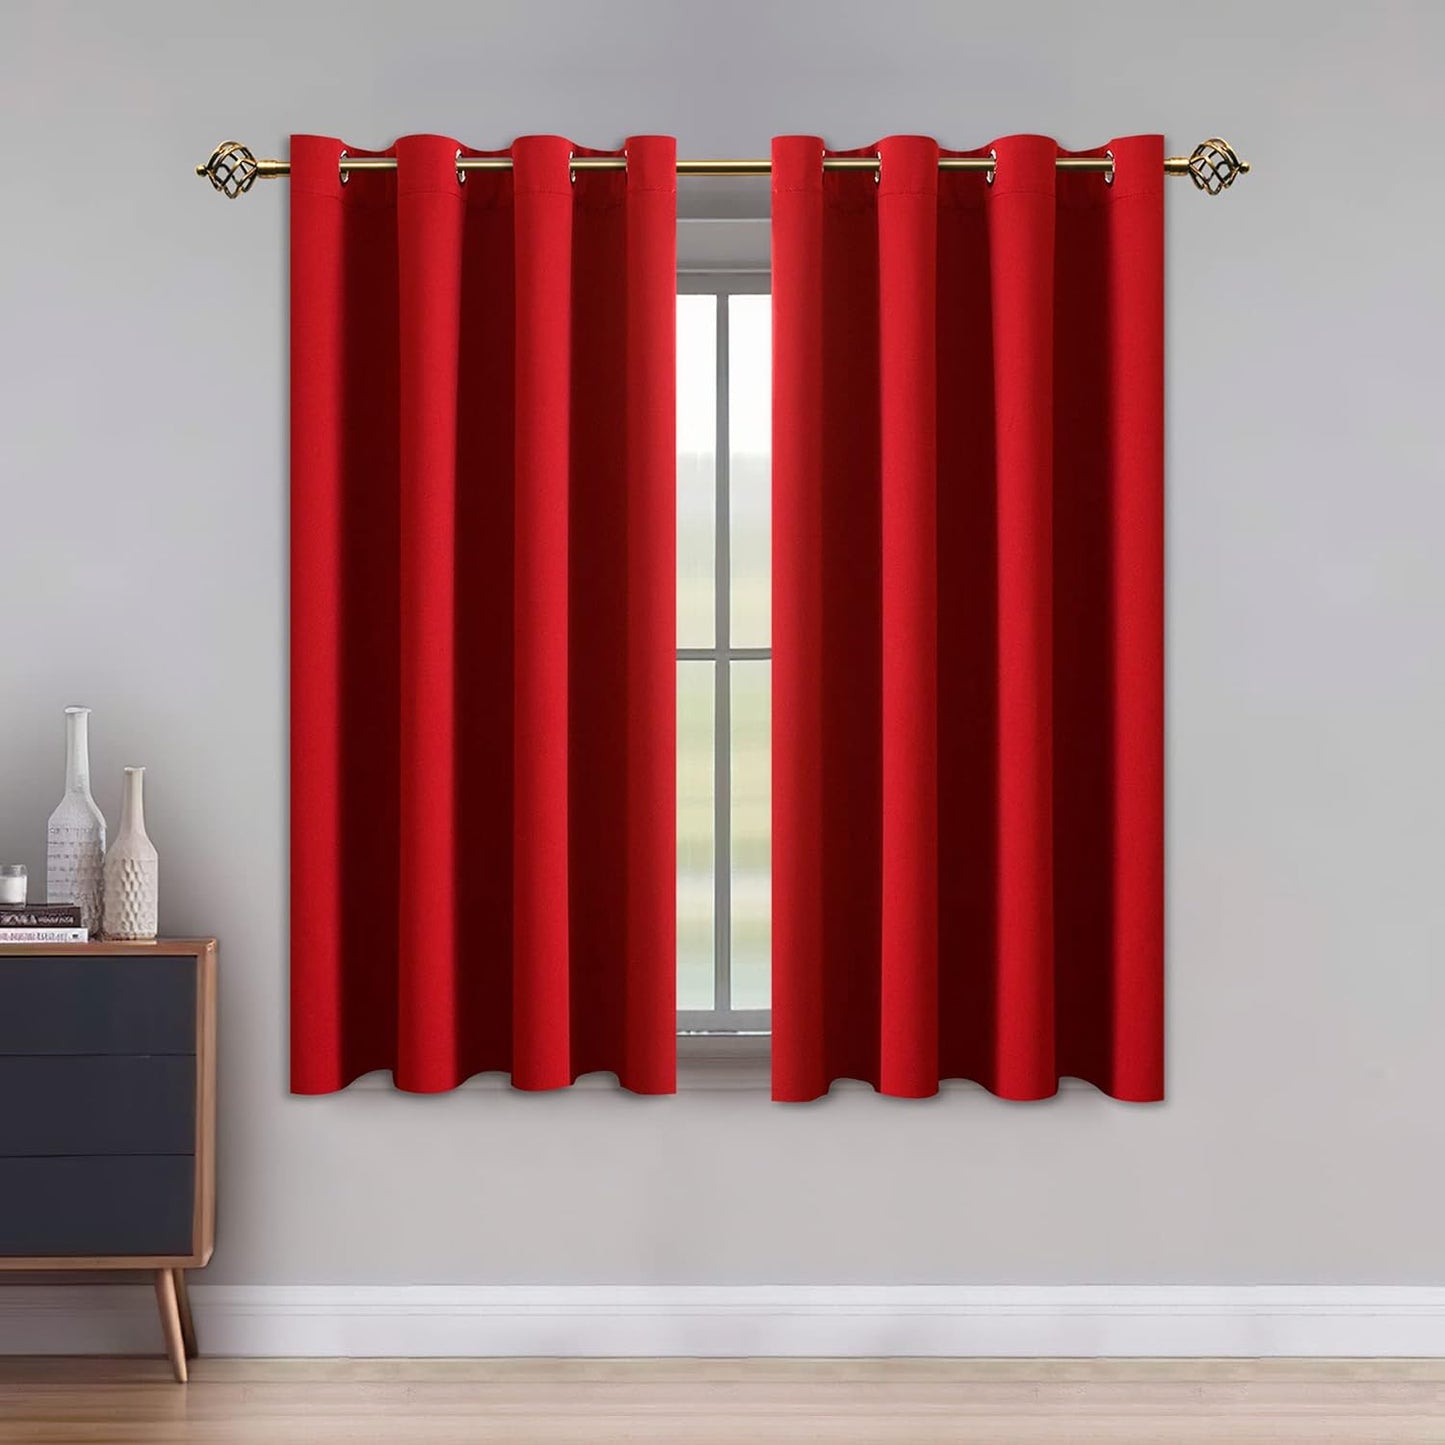 LUSHLEAF Blackout Curtains for Bedroom, Solid Thermal Insulated with Grommet Noise Reduction Window Drapes, Room Darkening Curtains for Living Room, 2 Panels, 52 X 63 Inch Grey  SHEEROOM Red 52 X 54 Inch 